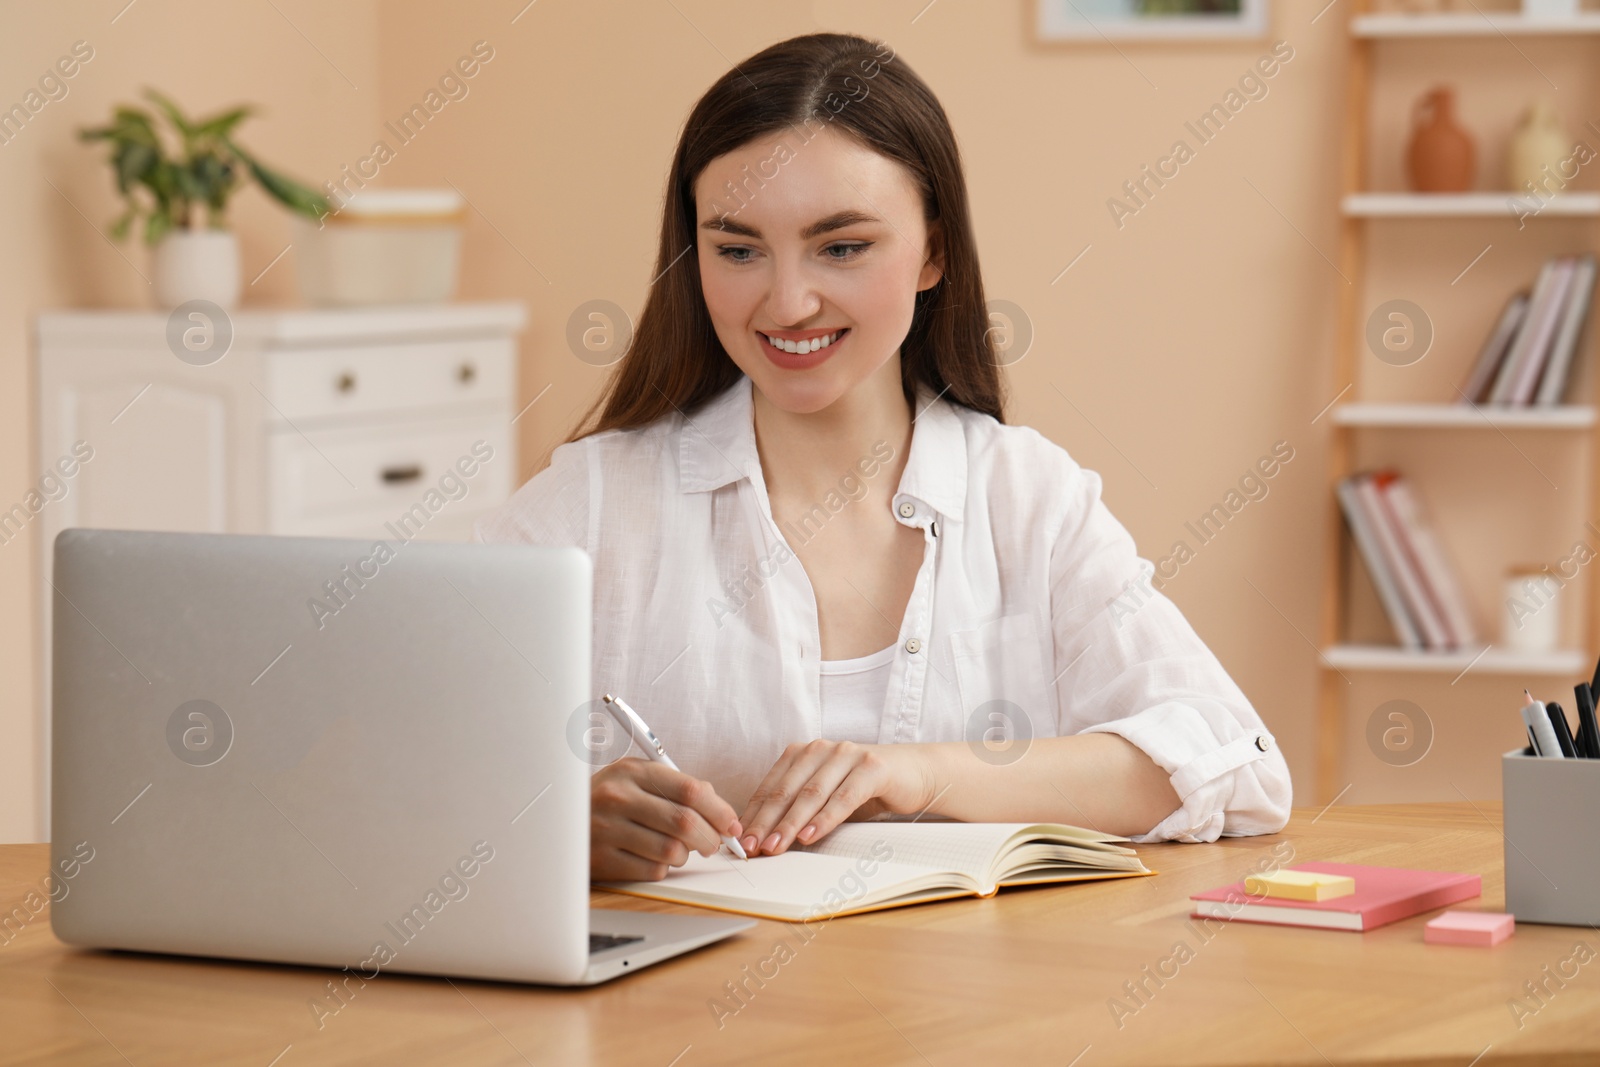 Photo of Happy young woman writing in notebook while working on laptop at wooden table indoors